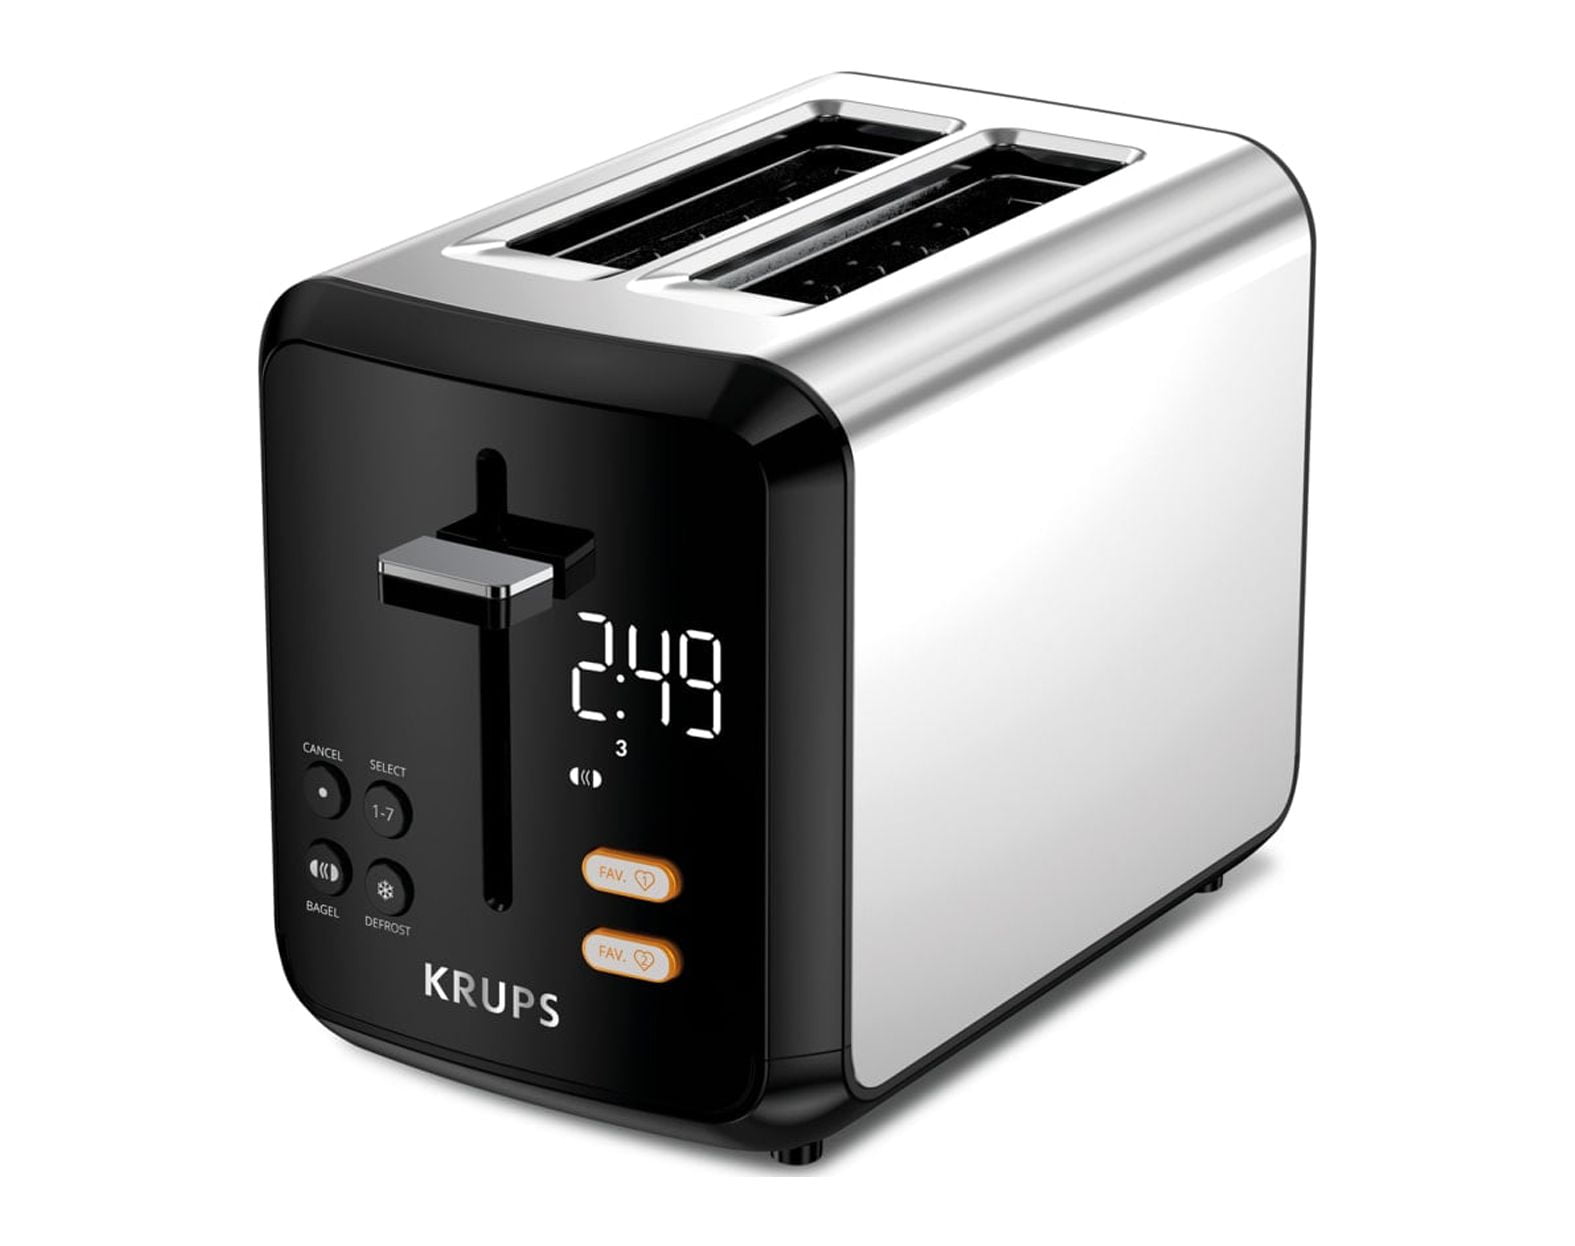 KRUPS Krups Express Toaster KH411D50 Stainless Steel Toaster with Wide  Slots, Includes Dust Lid & Crumb Tray, Defrost, Reheat, 7 Browning Levels,  2 Slice, Stainless Steel 